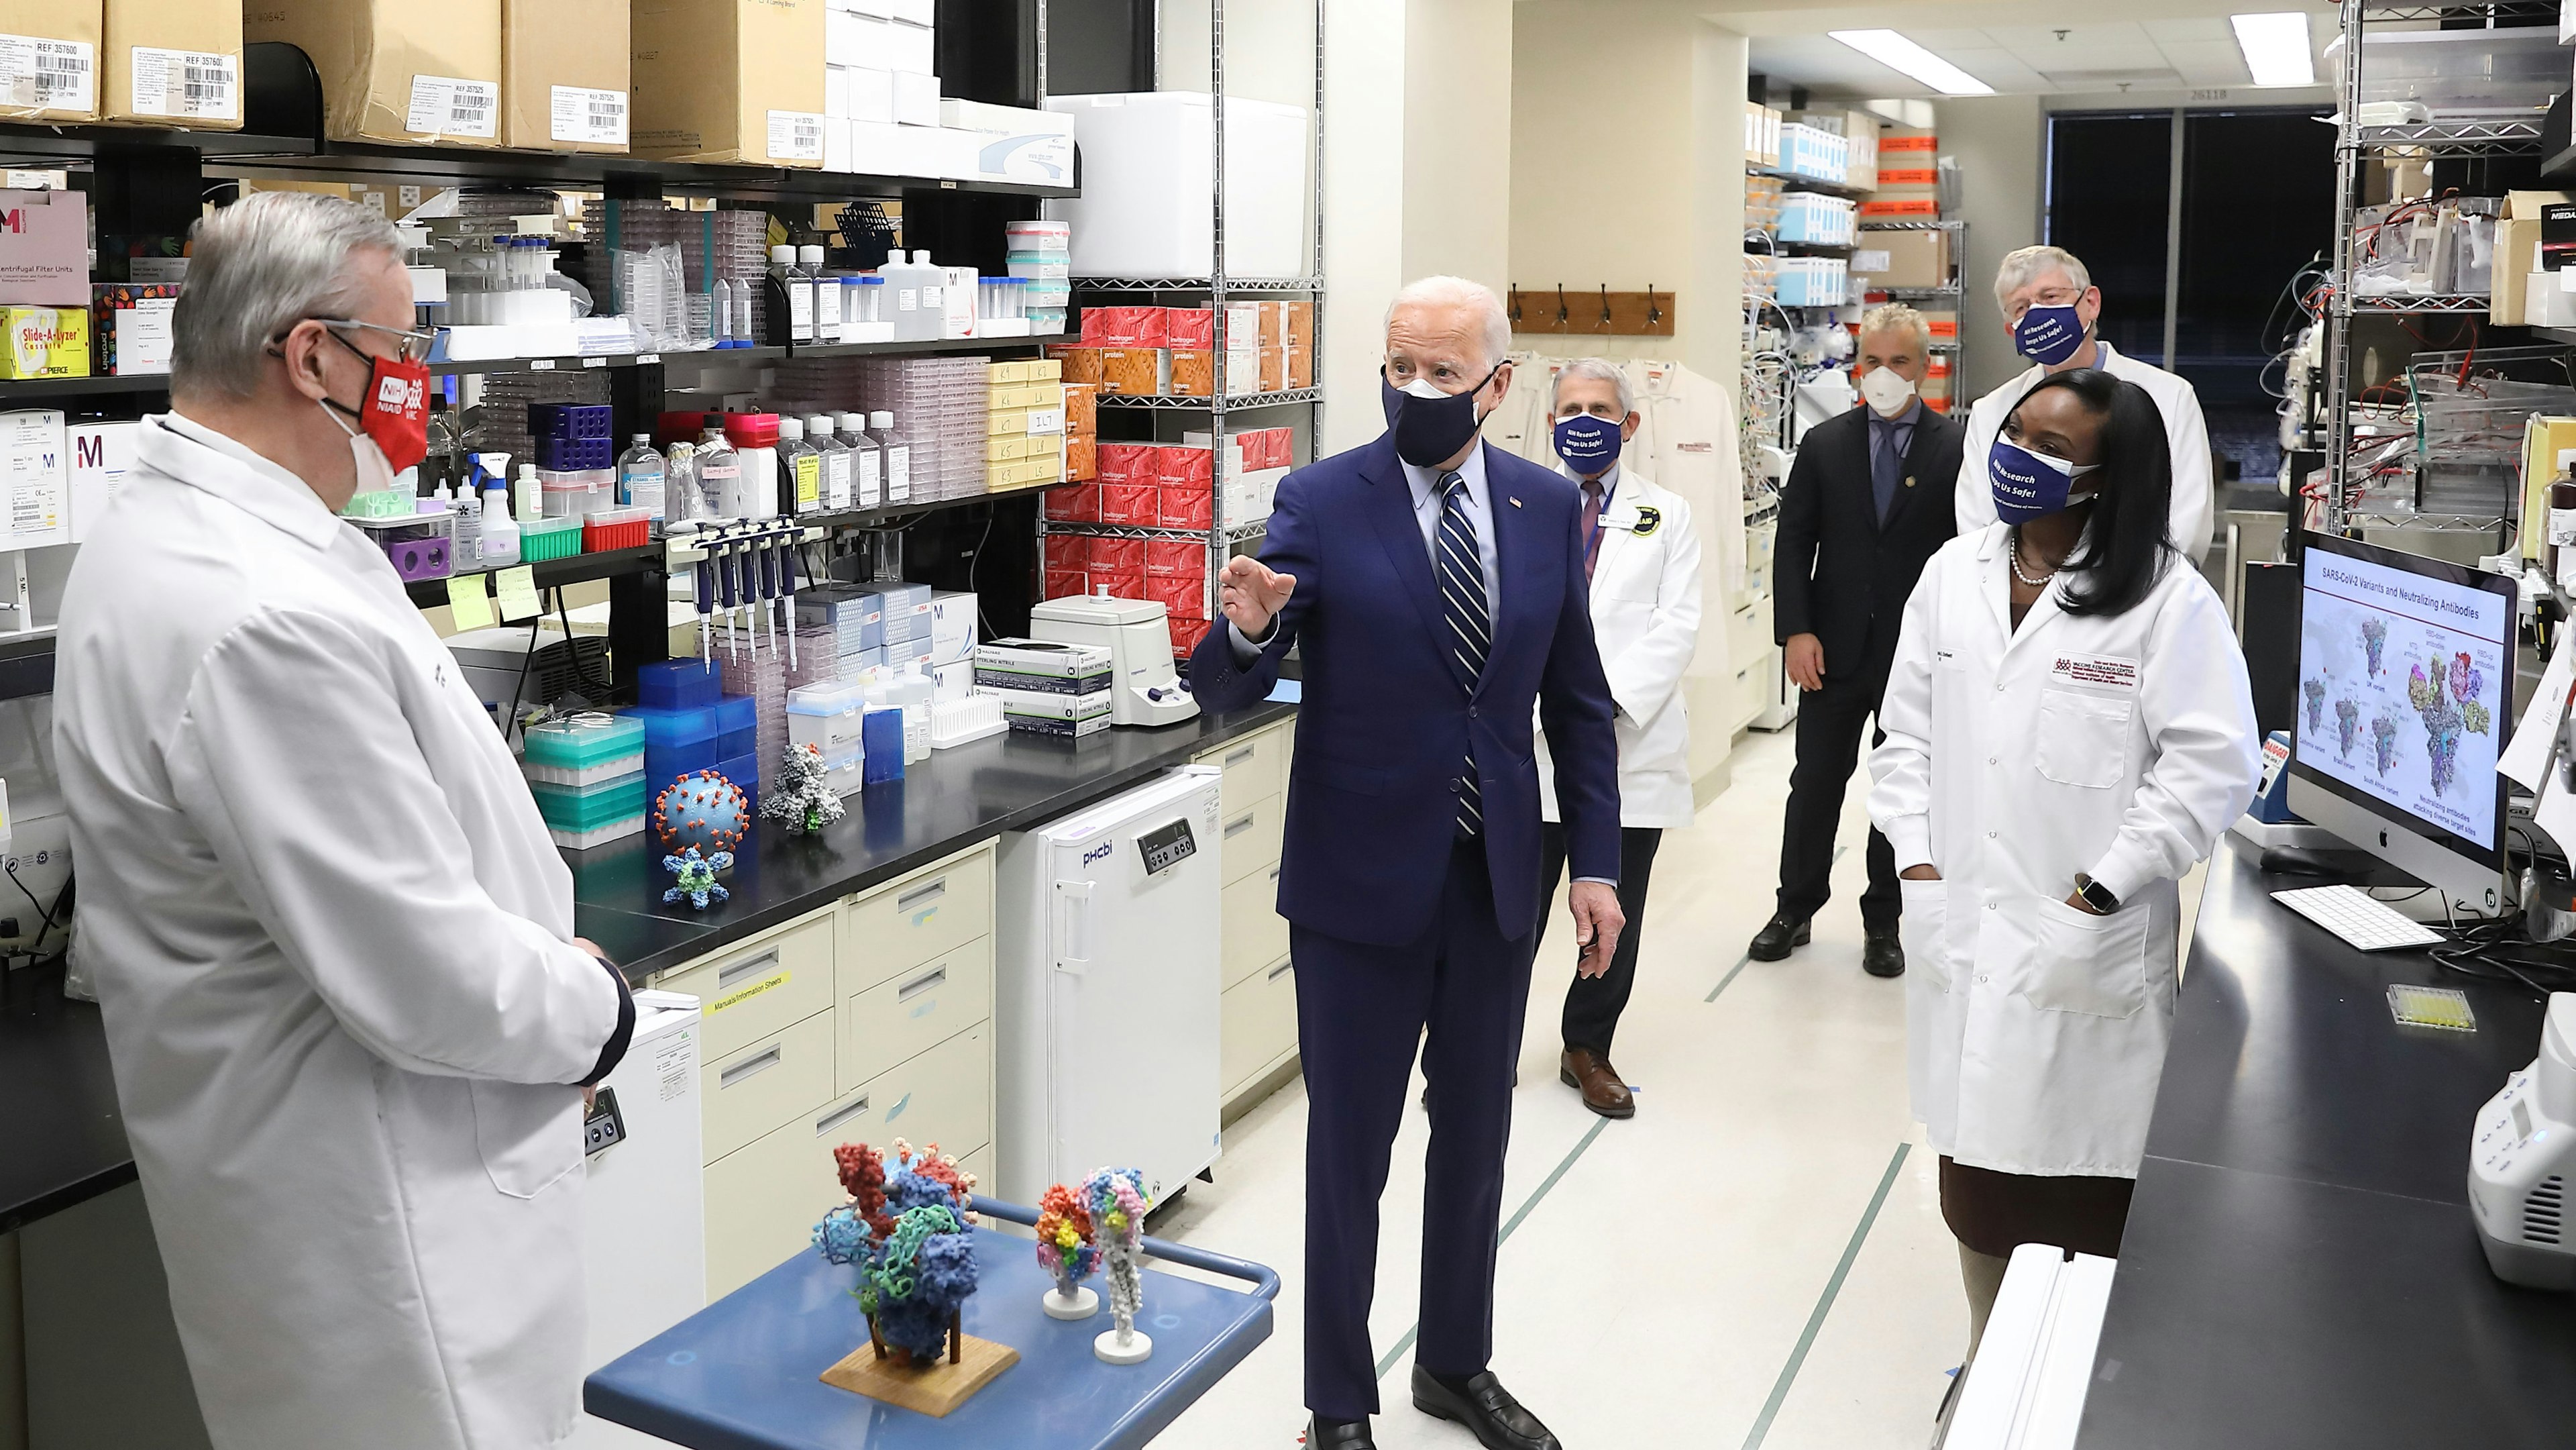 President Joe Biden visited NIH on February 11, 2020, where he met with leading researchers at the (COVID-19) Vaccine Research Center.